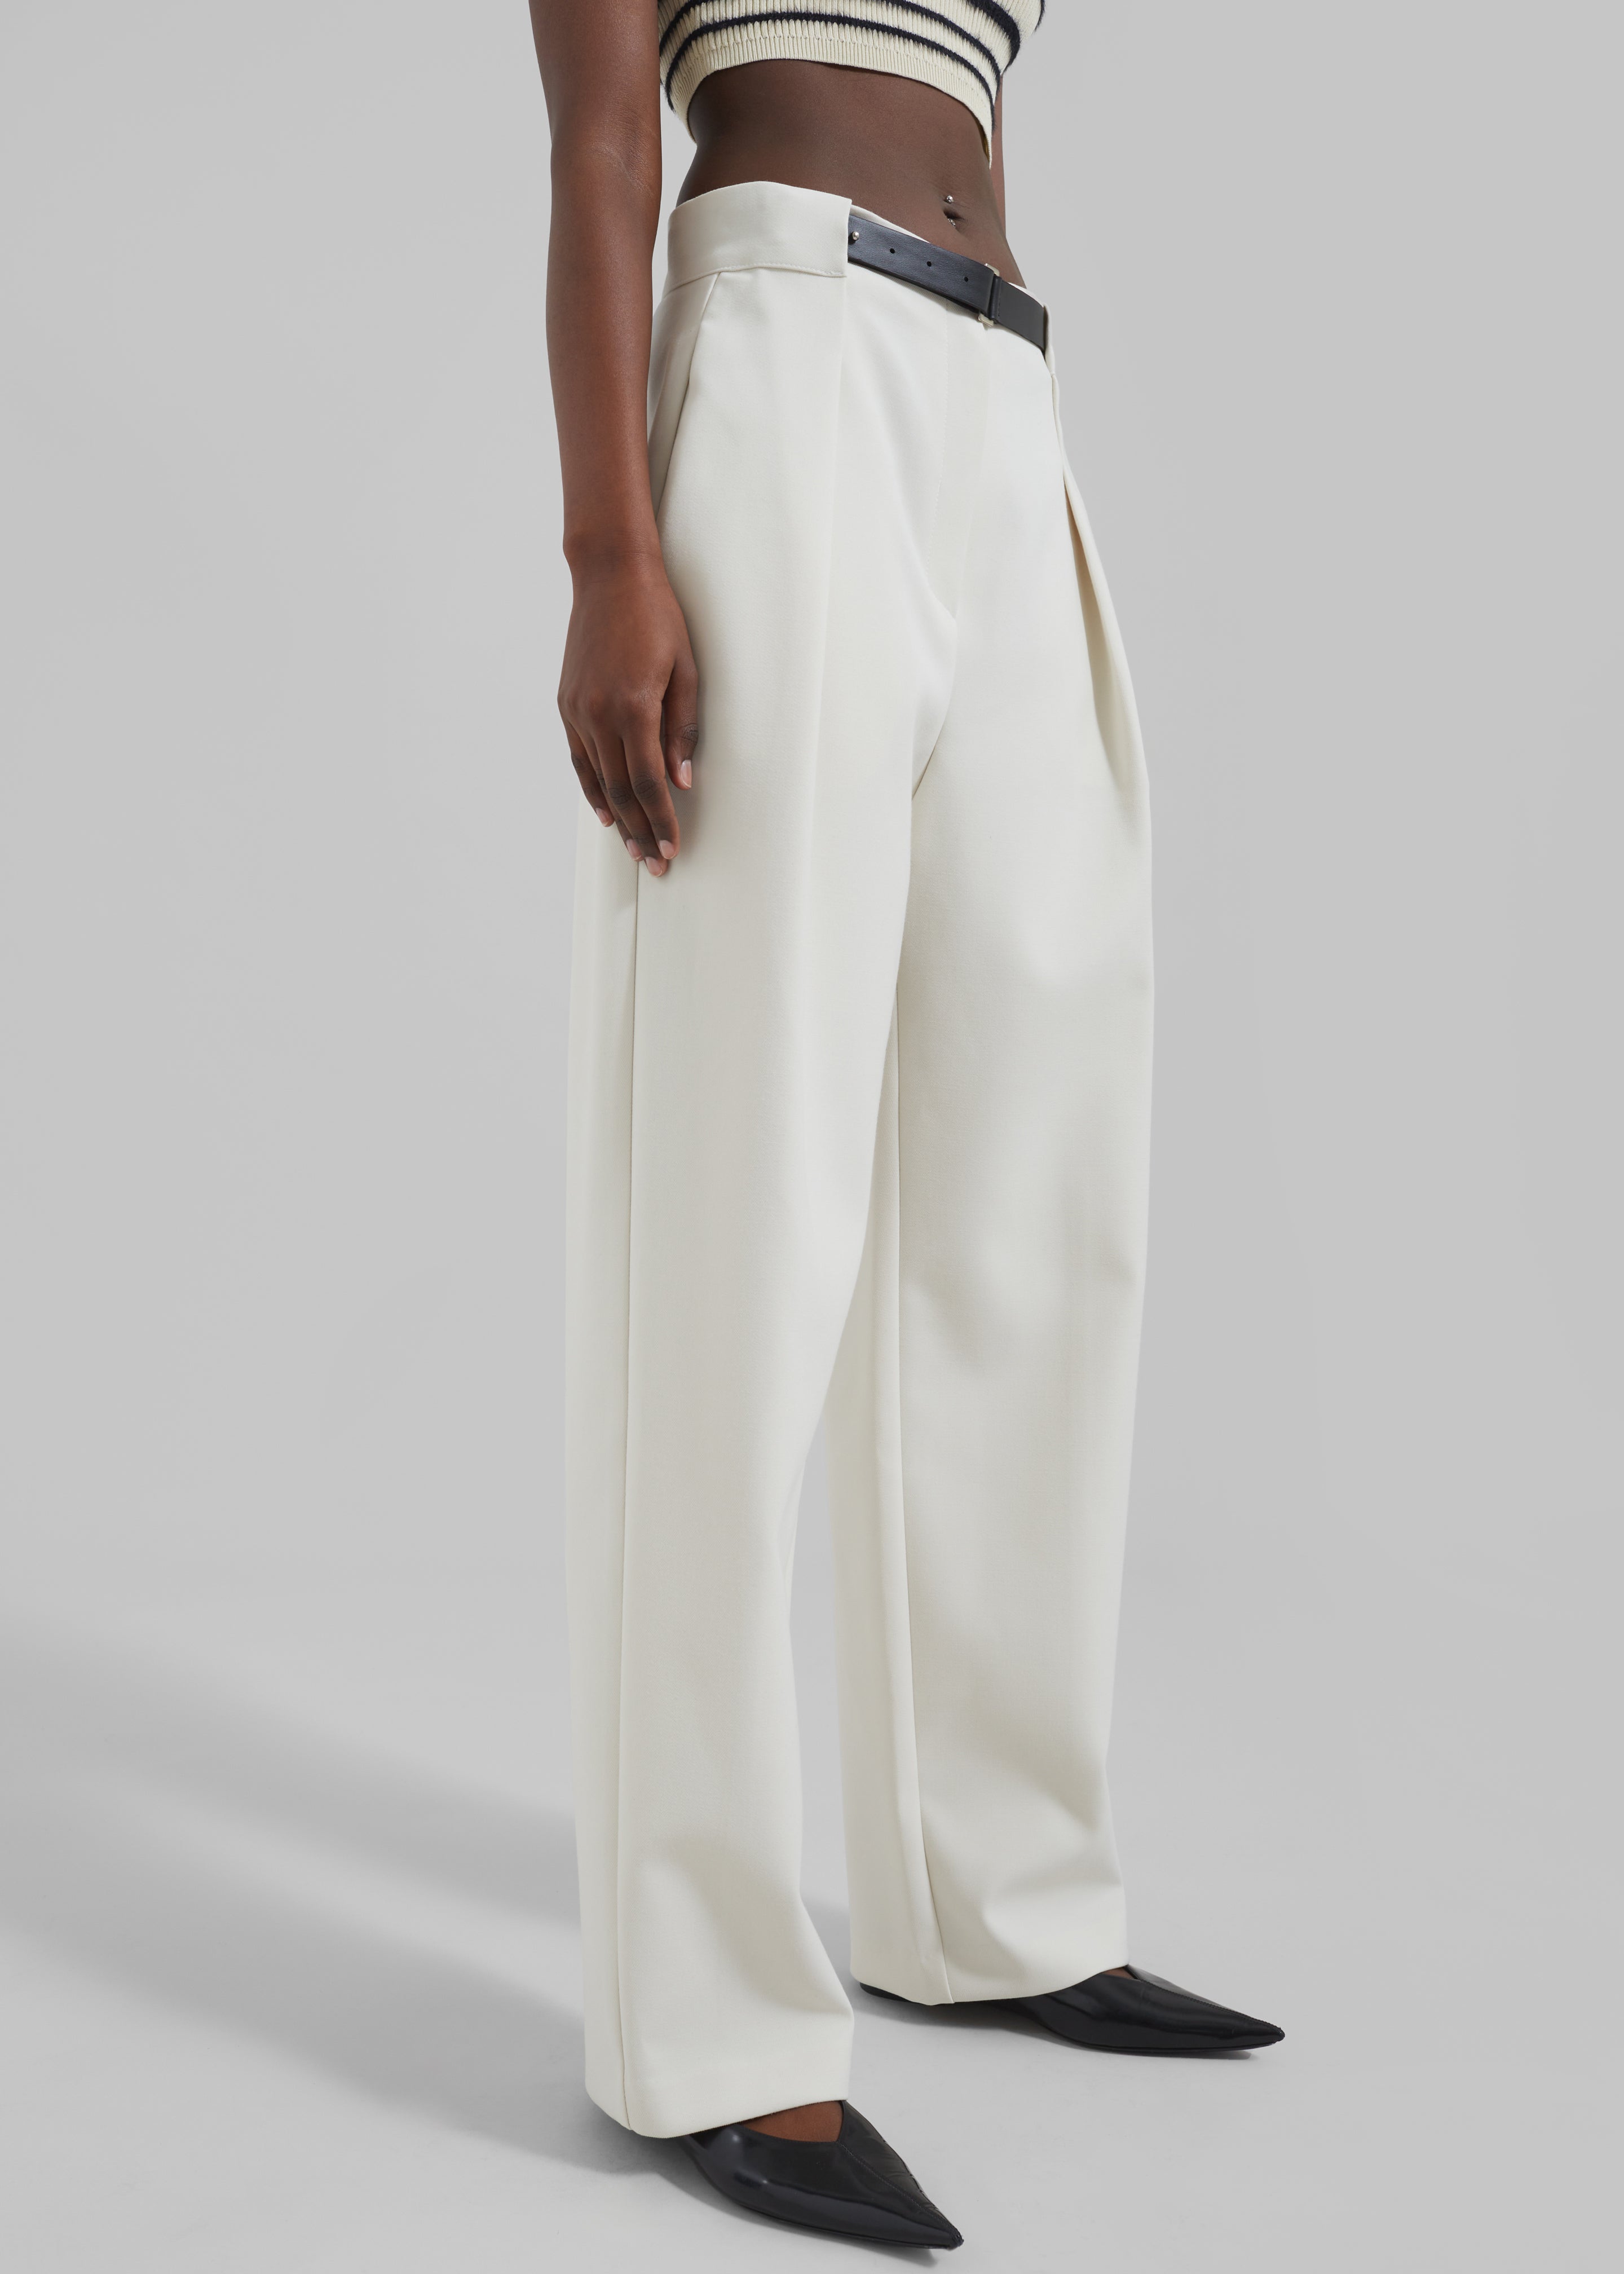 Corinne Belted Pants - Cream - 4